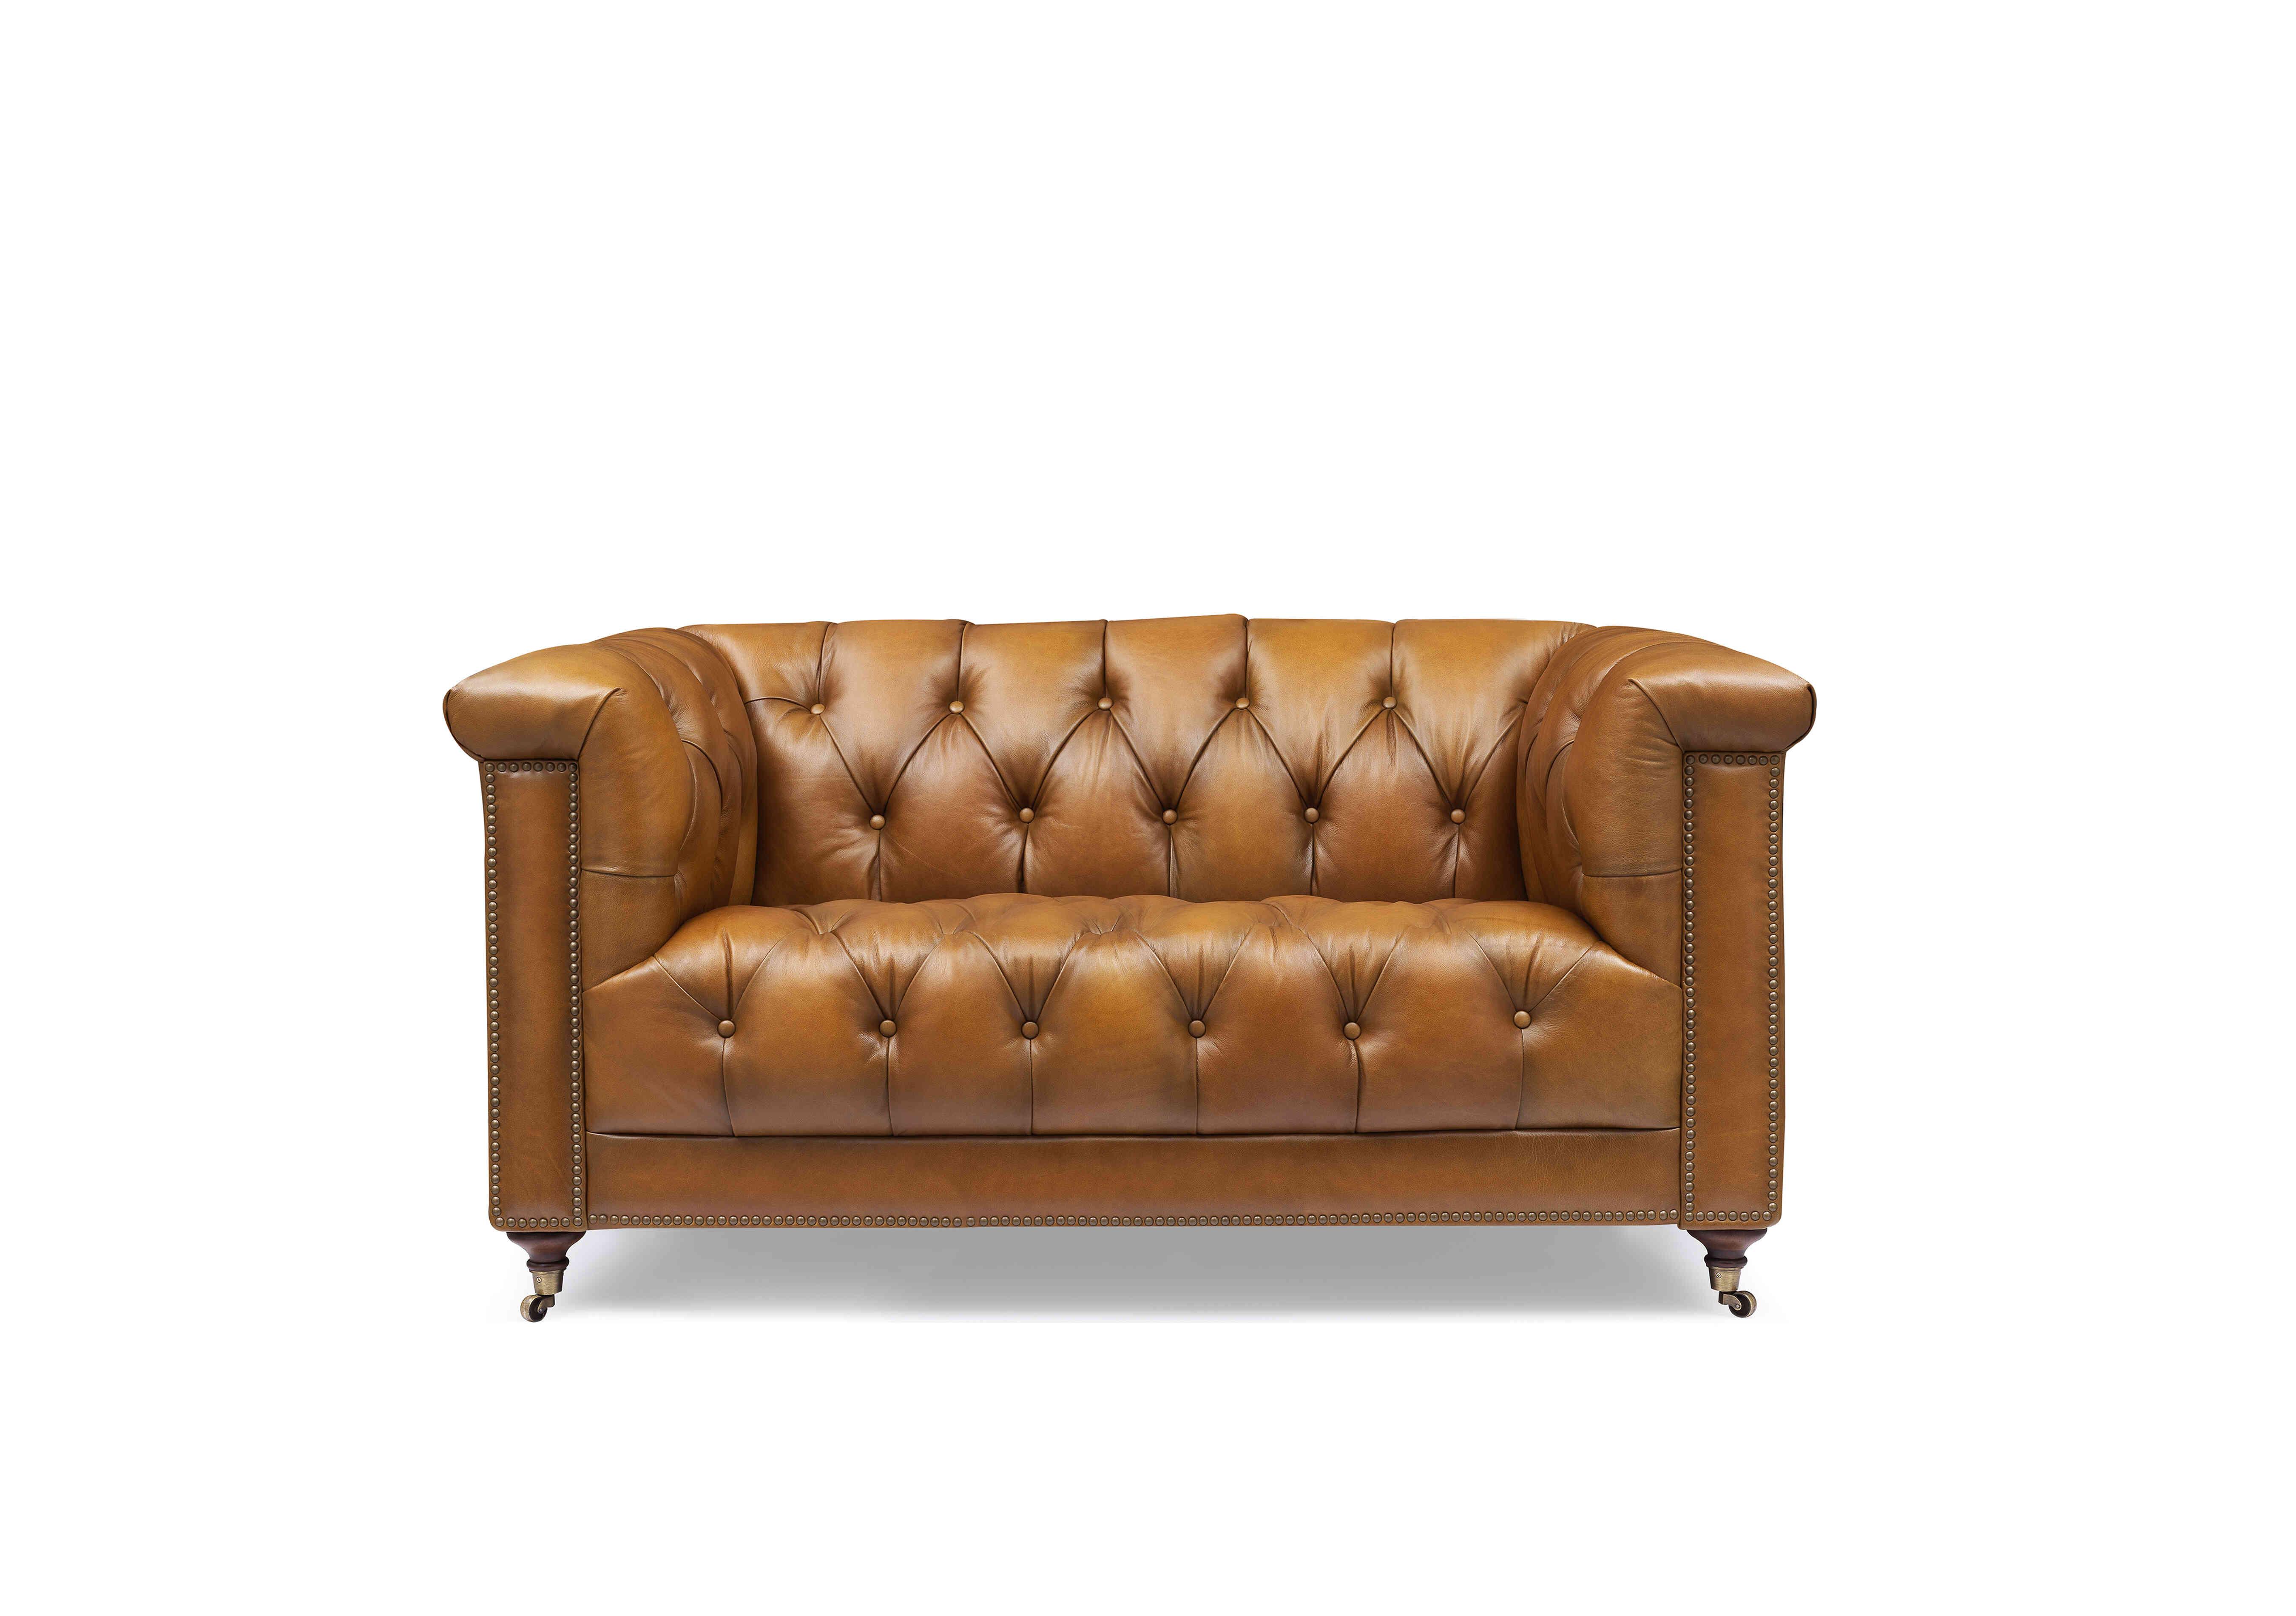 Wallace 2 Seater Leather Chesterfield Sofa in X3y1-1957ls Inca on Furniture Village